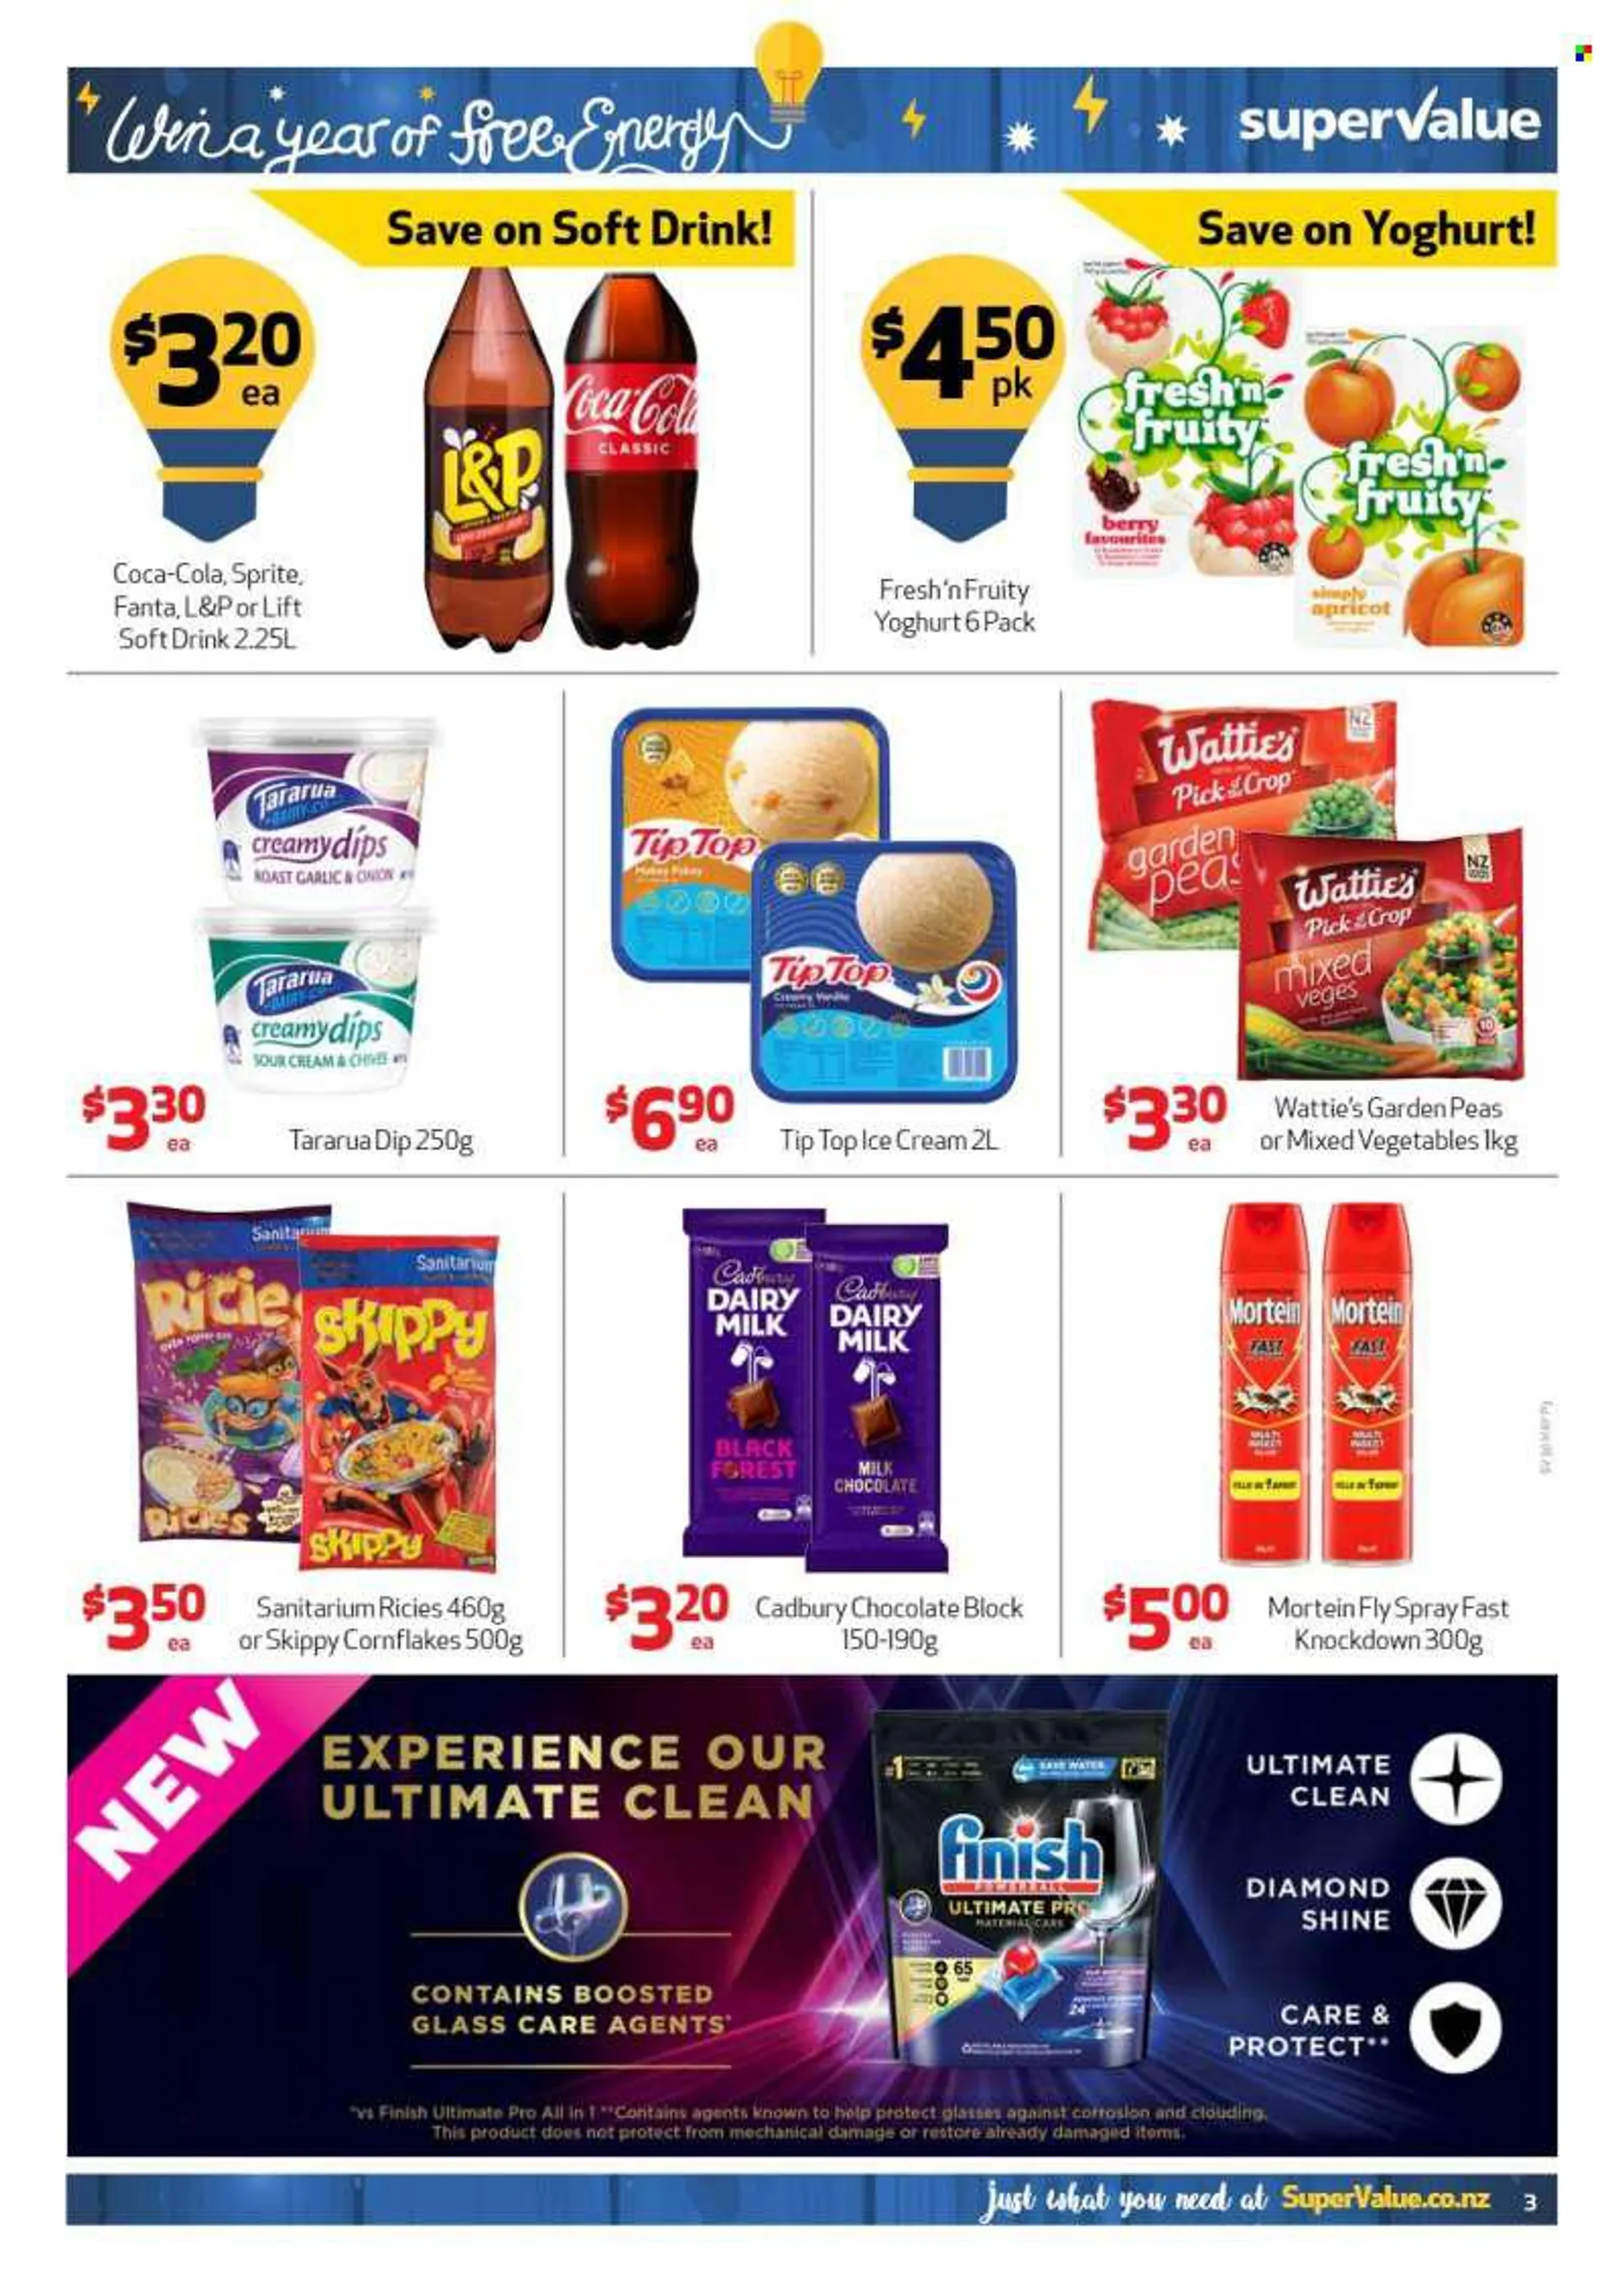 SuperValue mailer - 30.05.2022 - 05.06.2022. - 30 May 5 June 2022 - Page 3